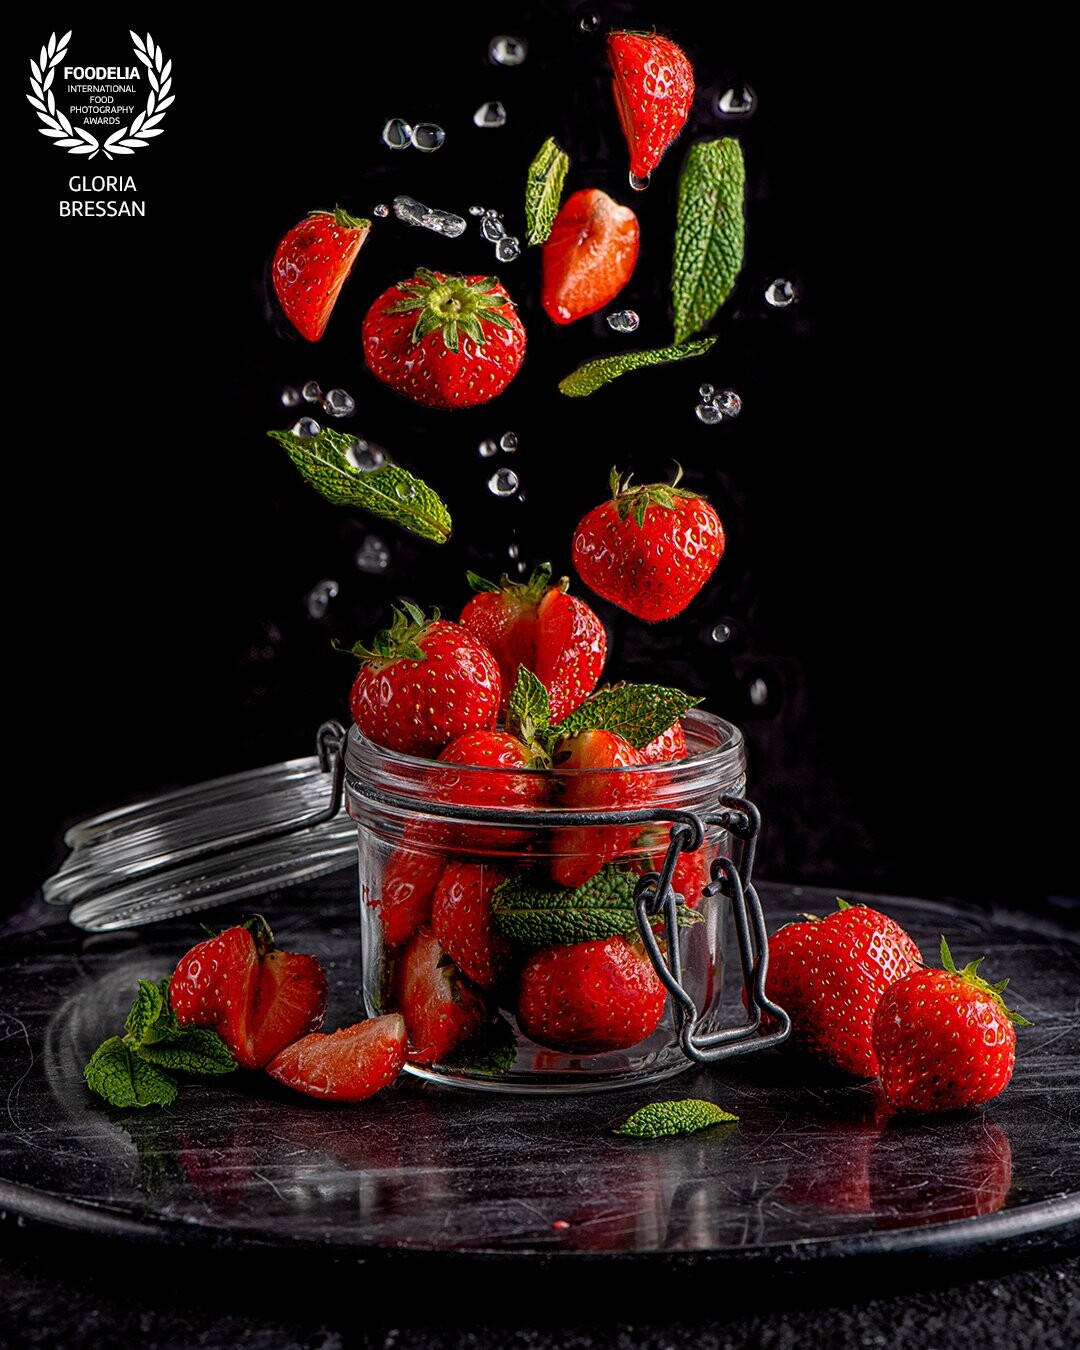 ...Are these strawberries coming out or are they going into the pot? :-)<br />
Taking this pic with real drops of water blown from under the table was the hardest thing !